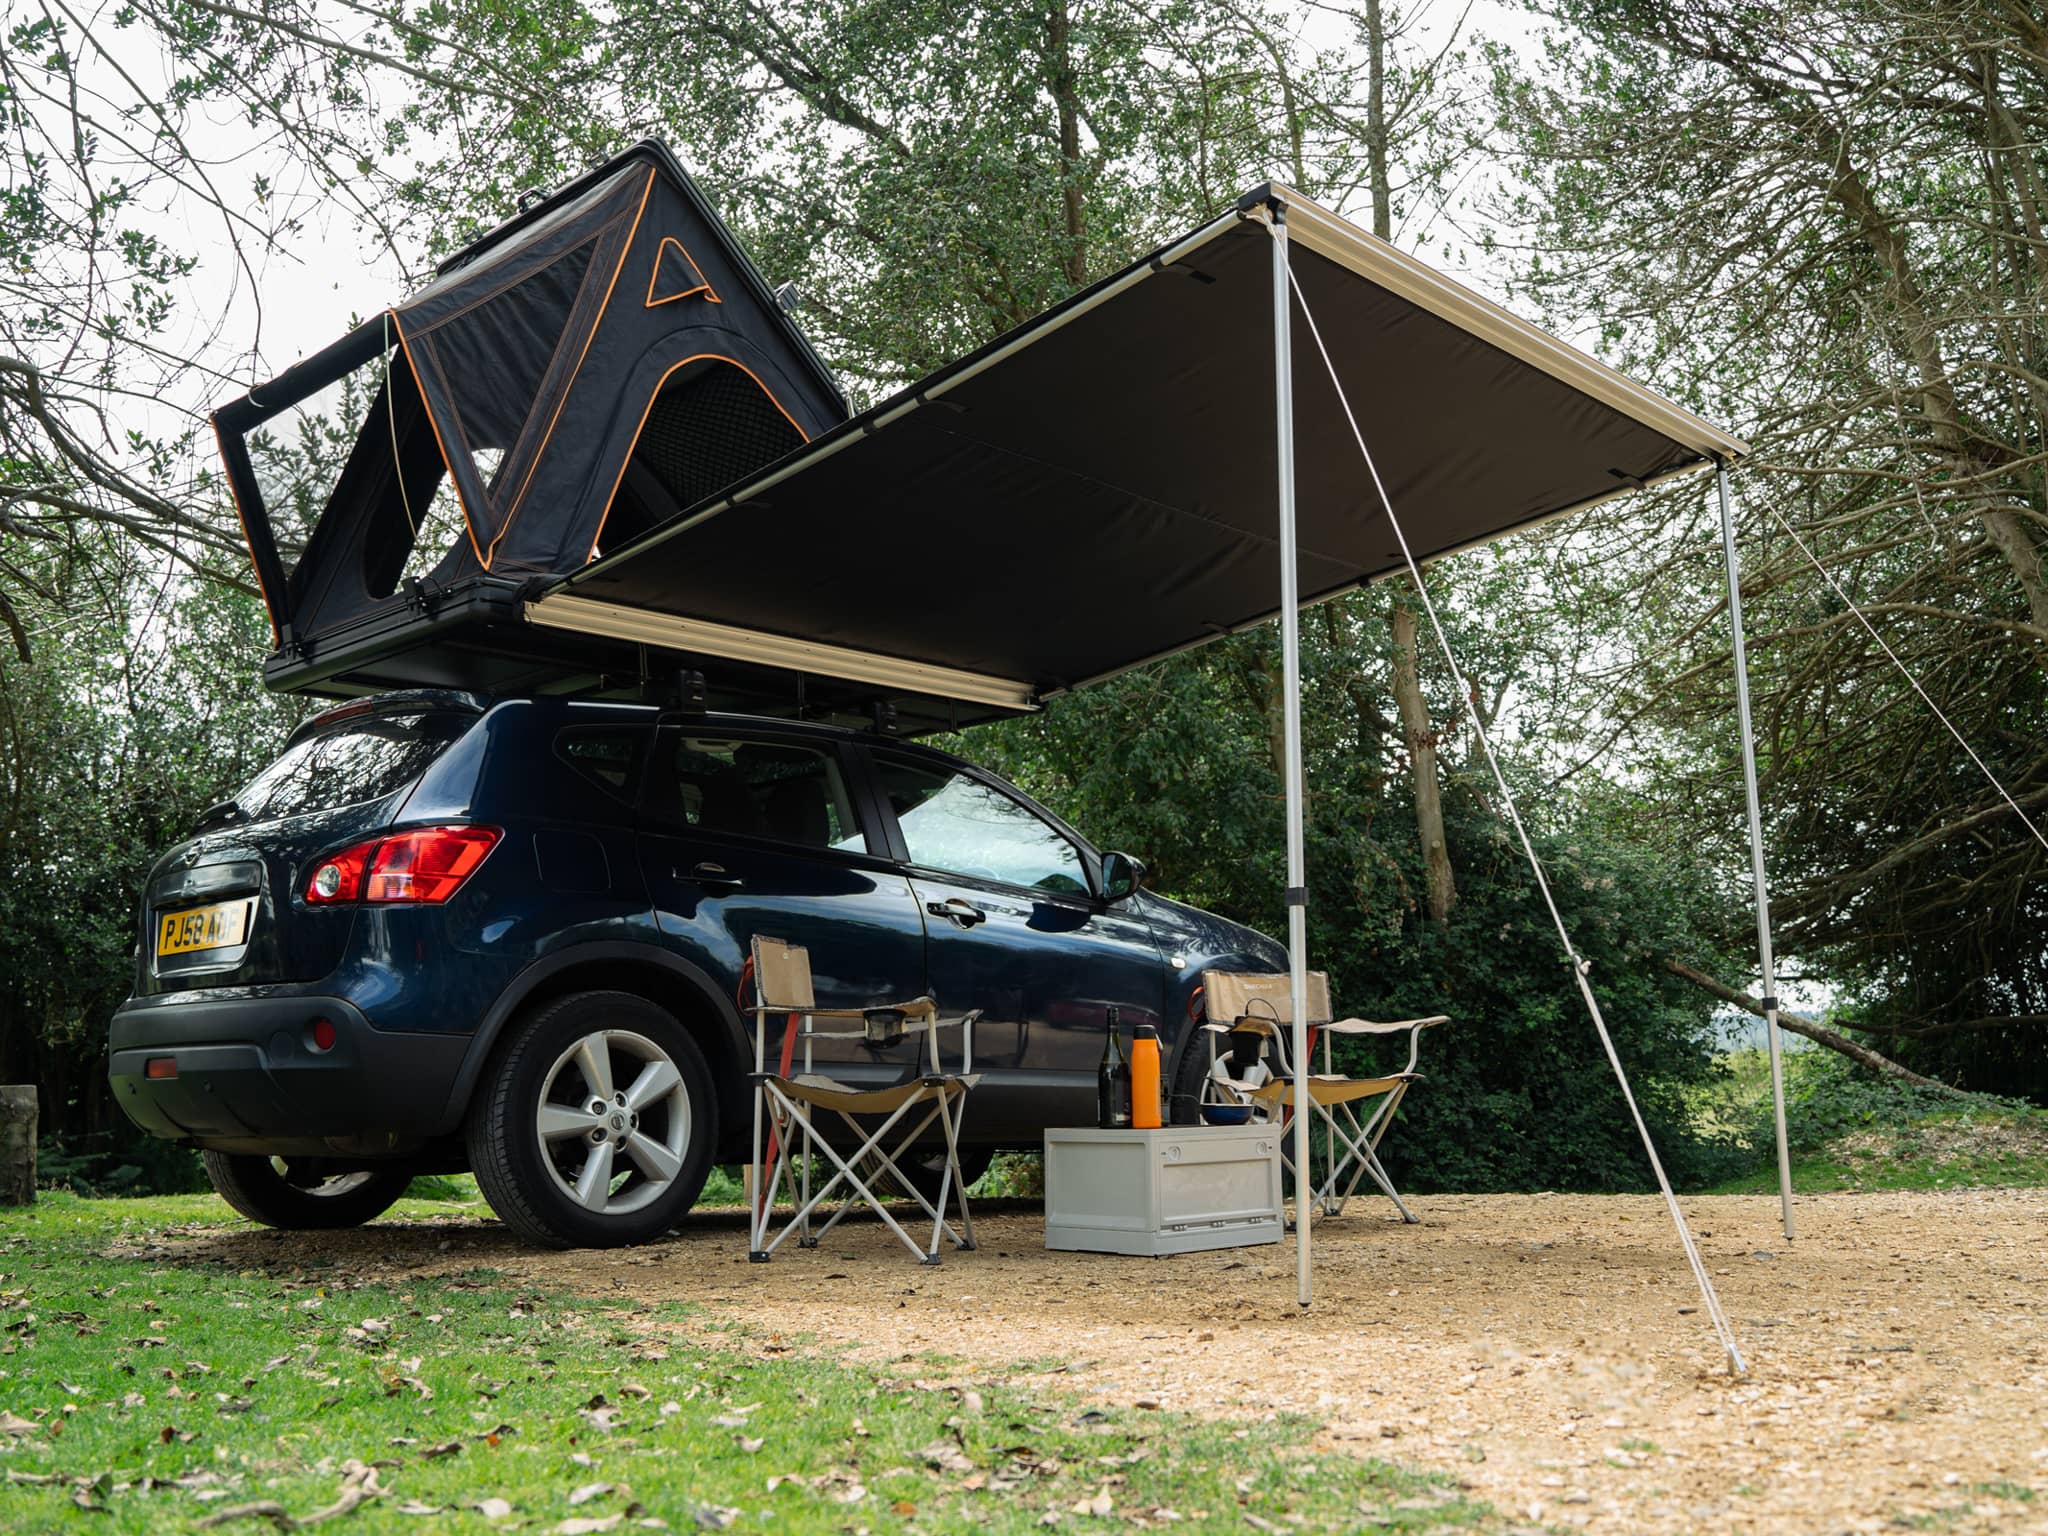 TentBox Univeral Side Awning - Awning for the car 